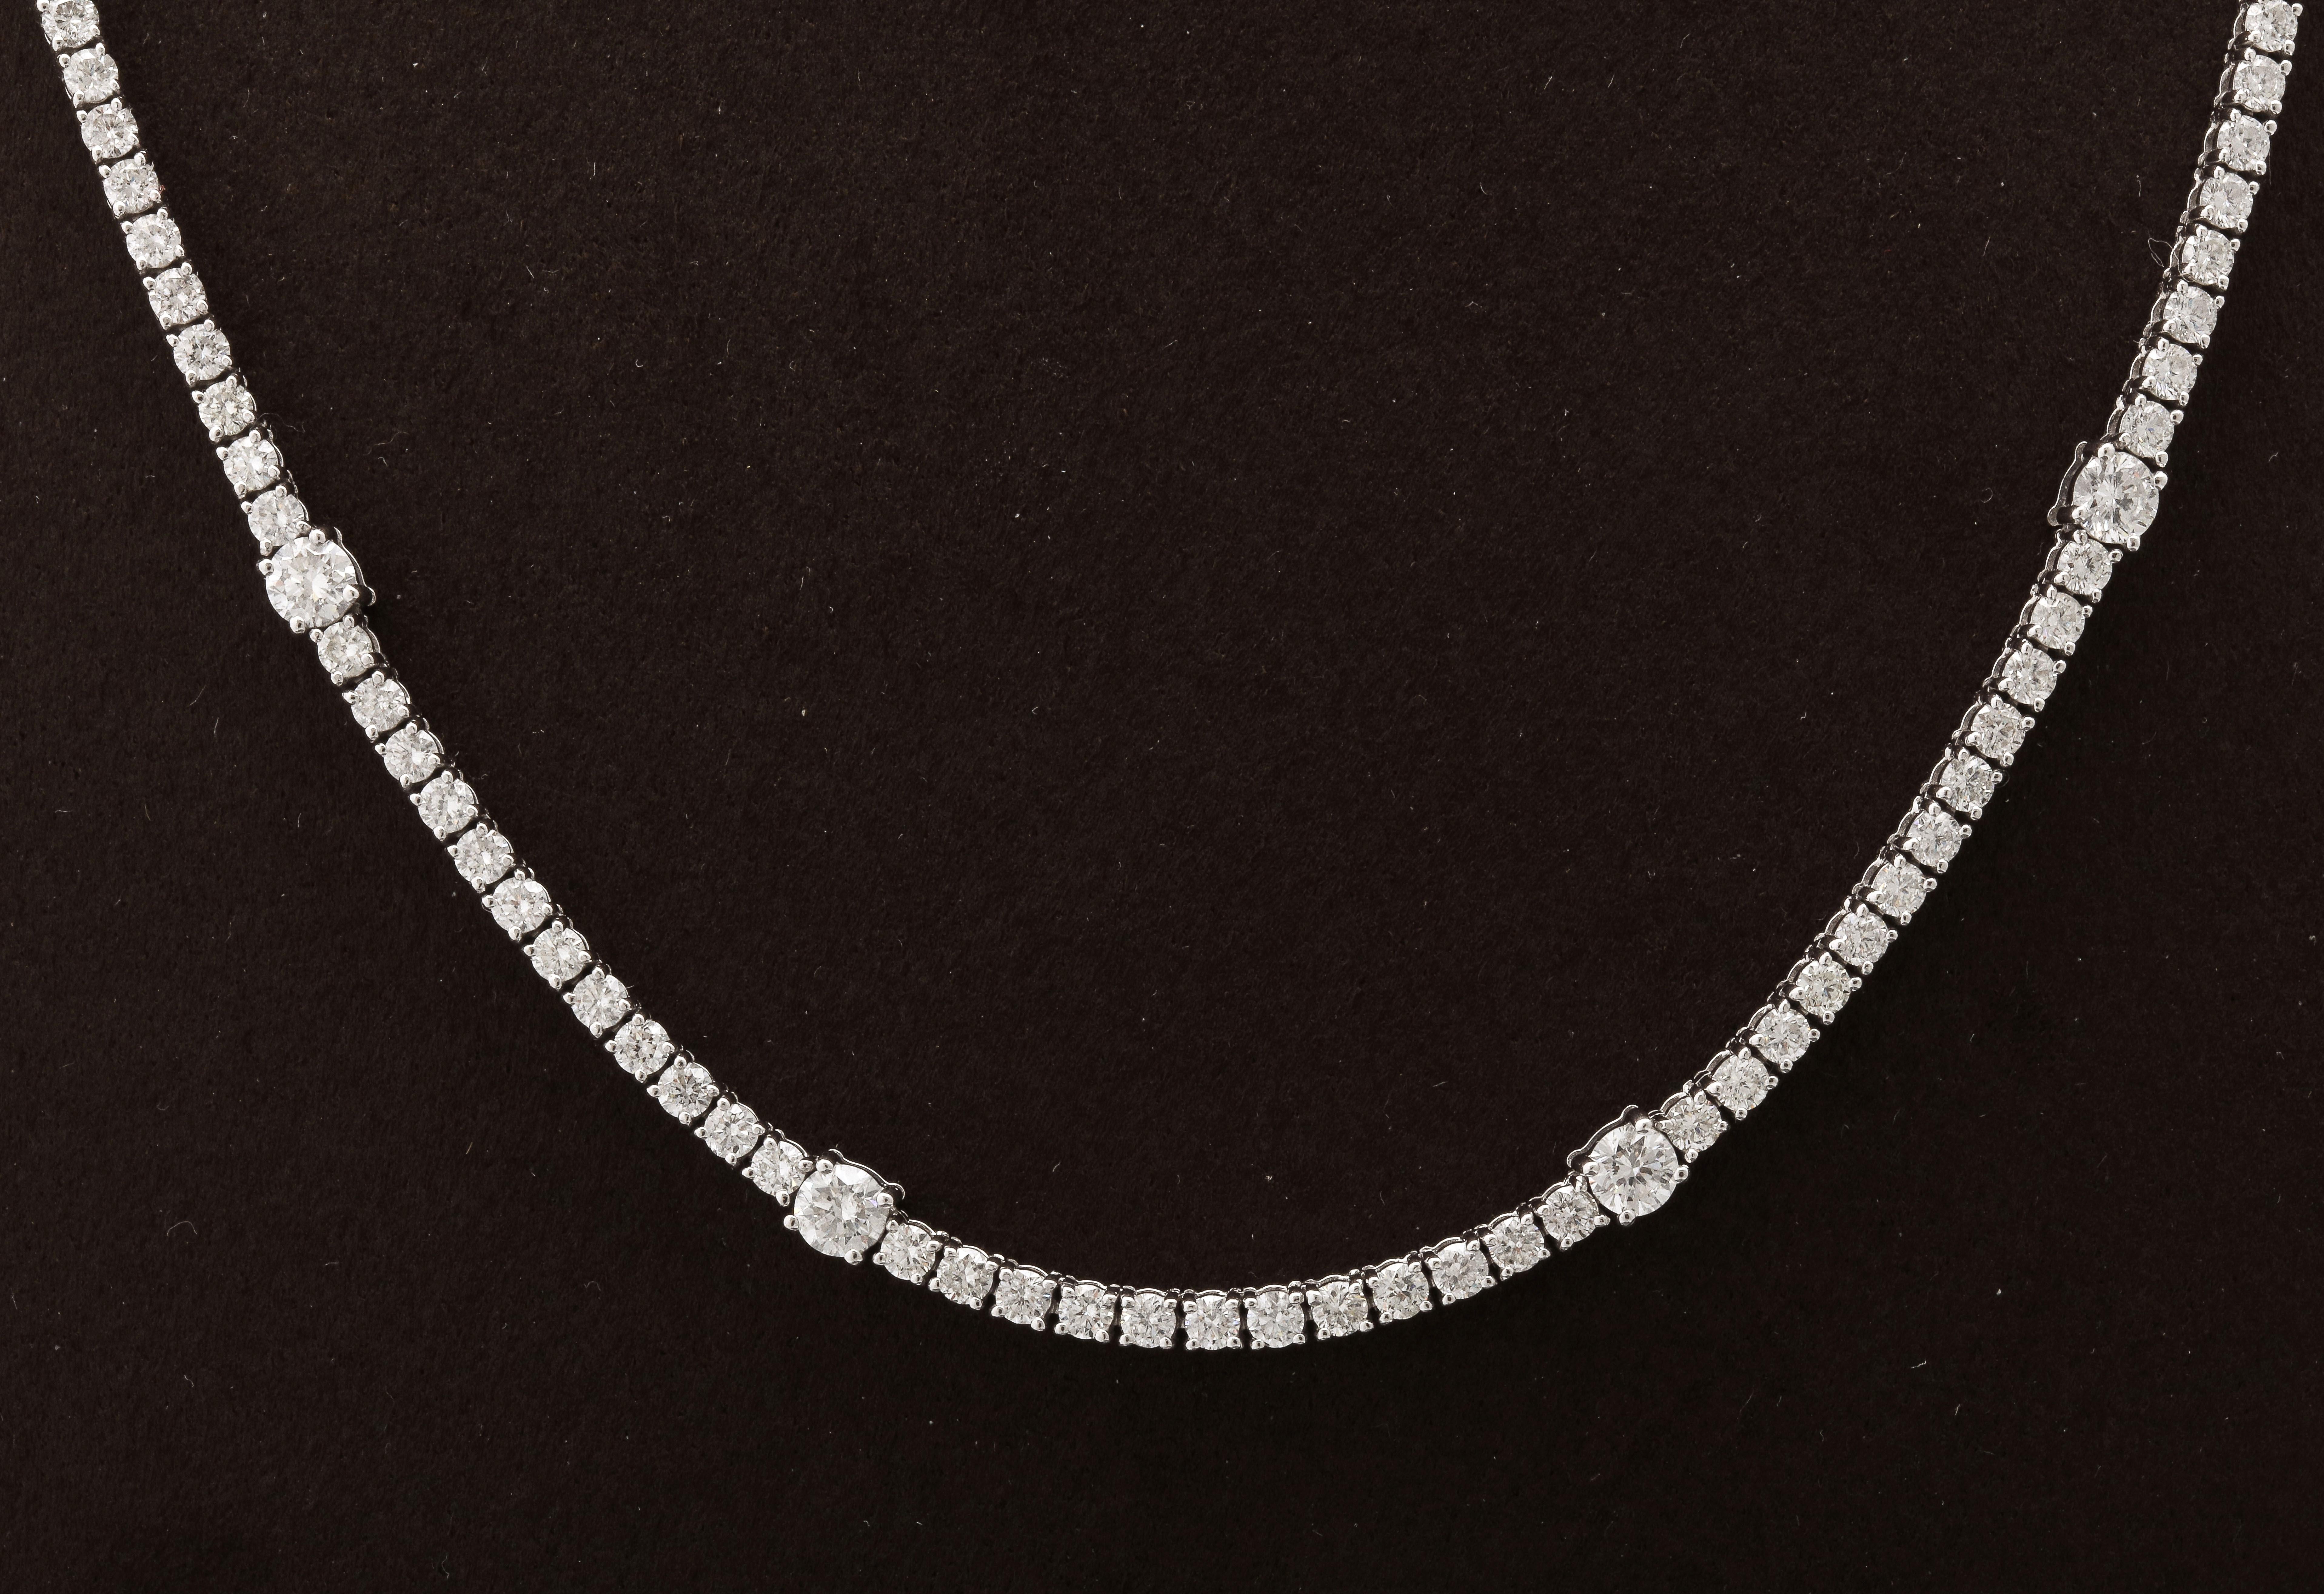 
A unique tennis necklace with 8 larger diamonds set throughout. 

8.15 carats of white round brilliant cut diamonds set in 18k white gold. 

16.5 inch length that can be adjusted if necessary. 

Looks beautiful on its own or layered with other